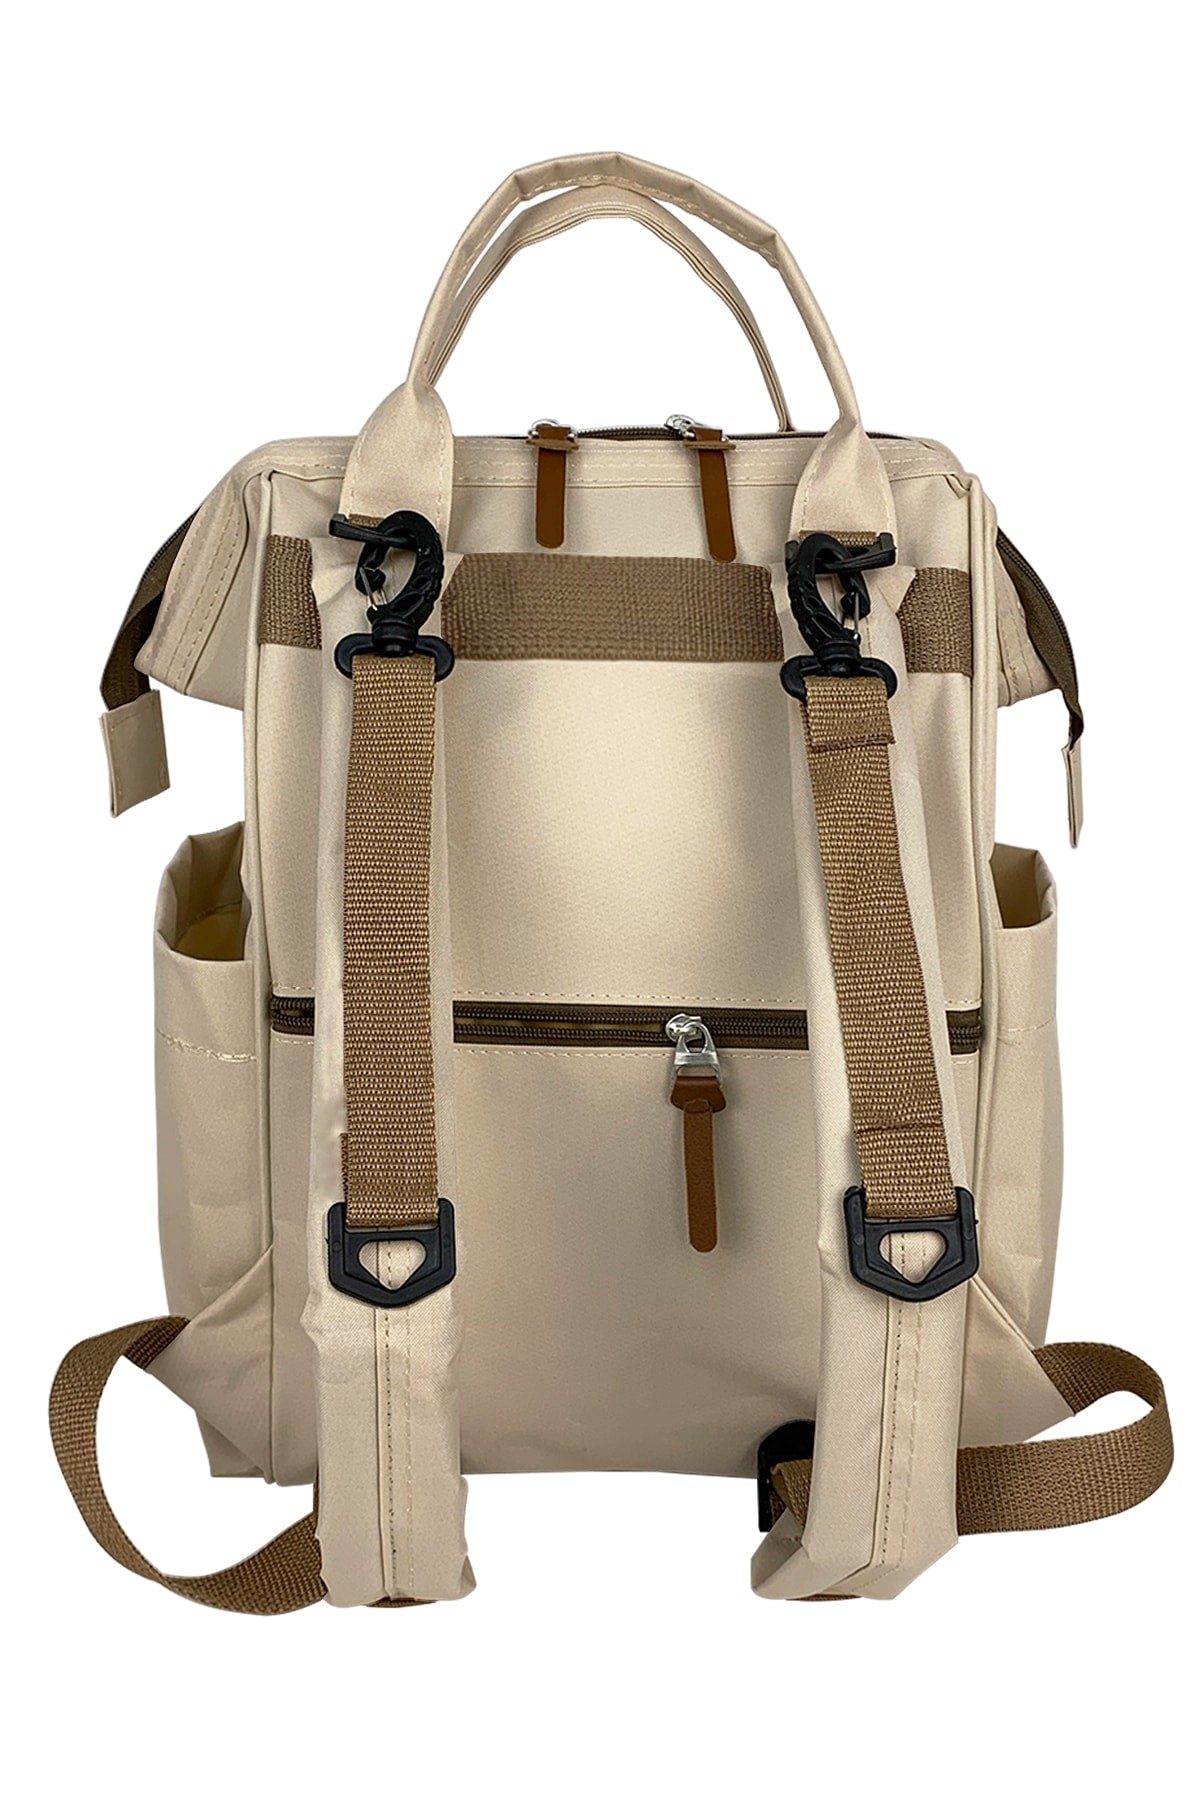 Paris Stylo Mother Baby Care Backpack-beige